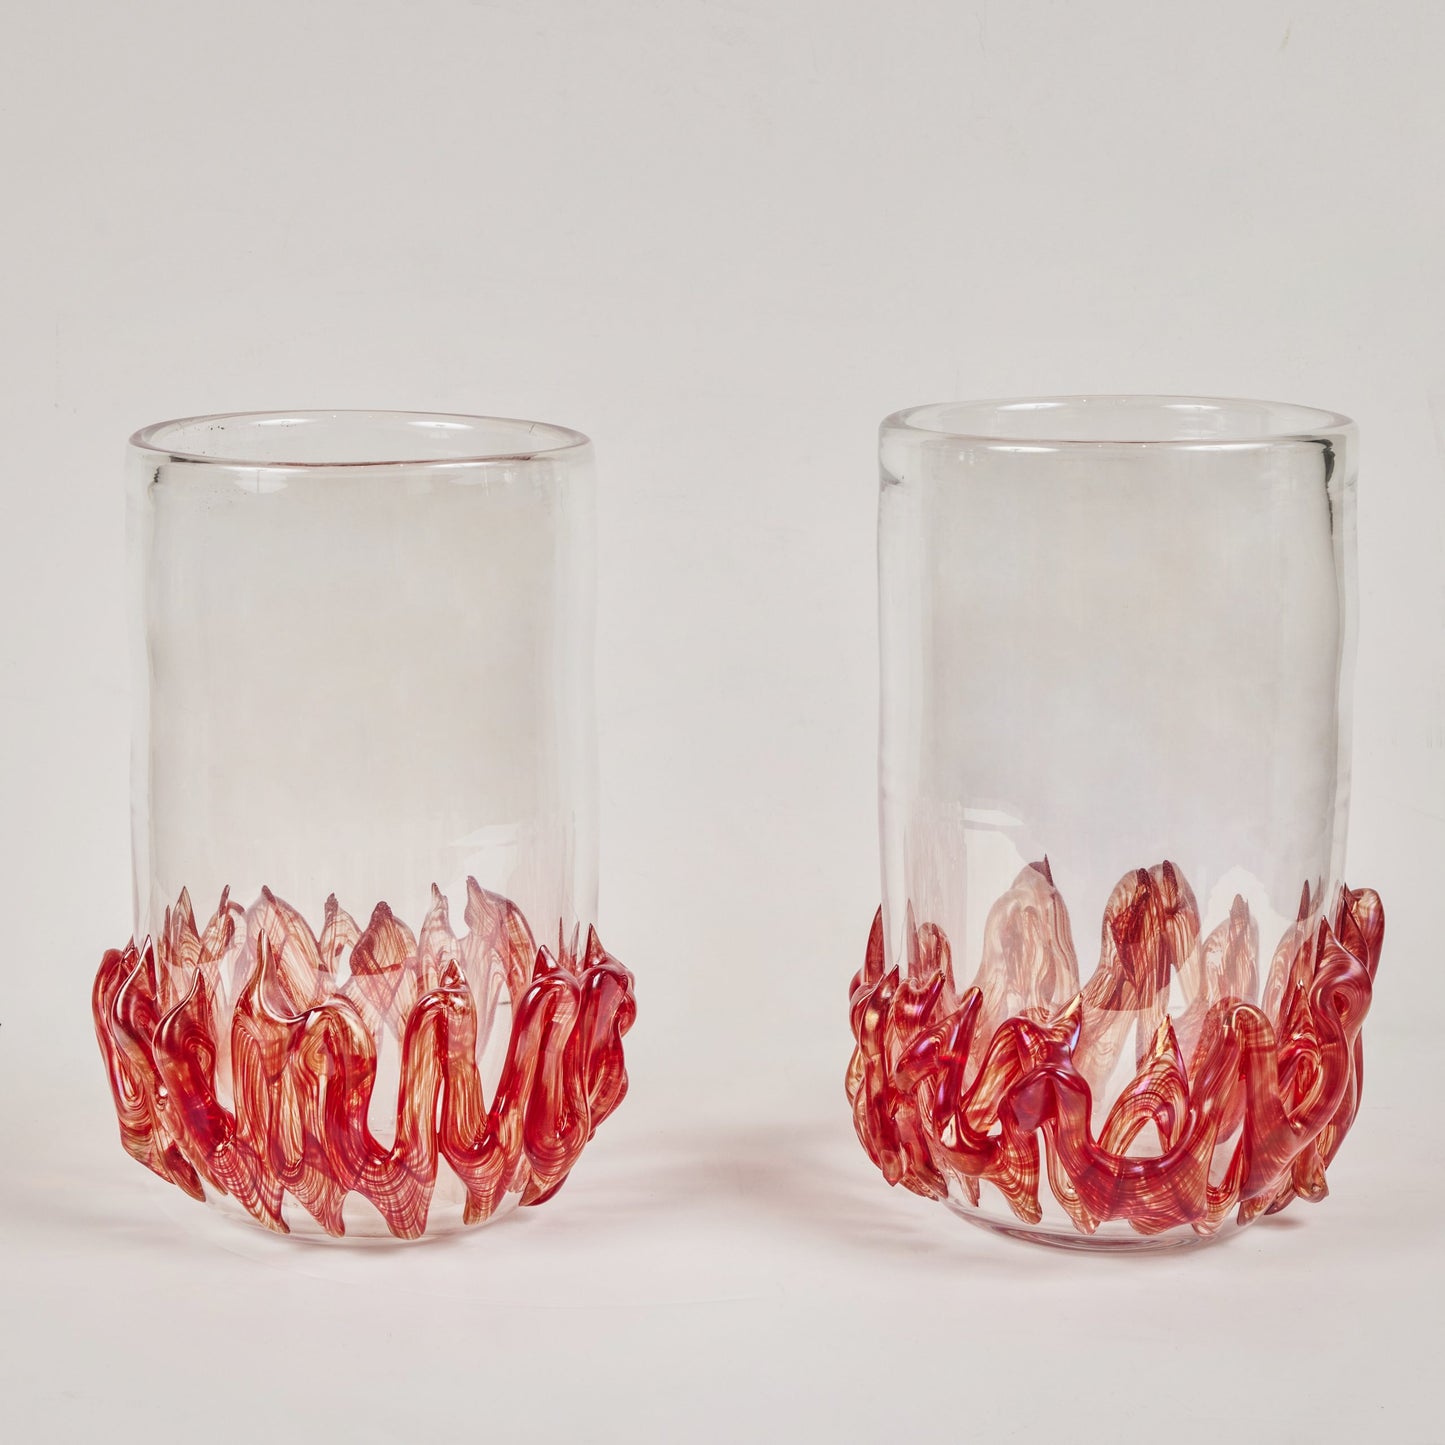 Signed Pair Murano Glass Vases With Flame Detail